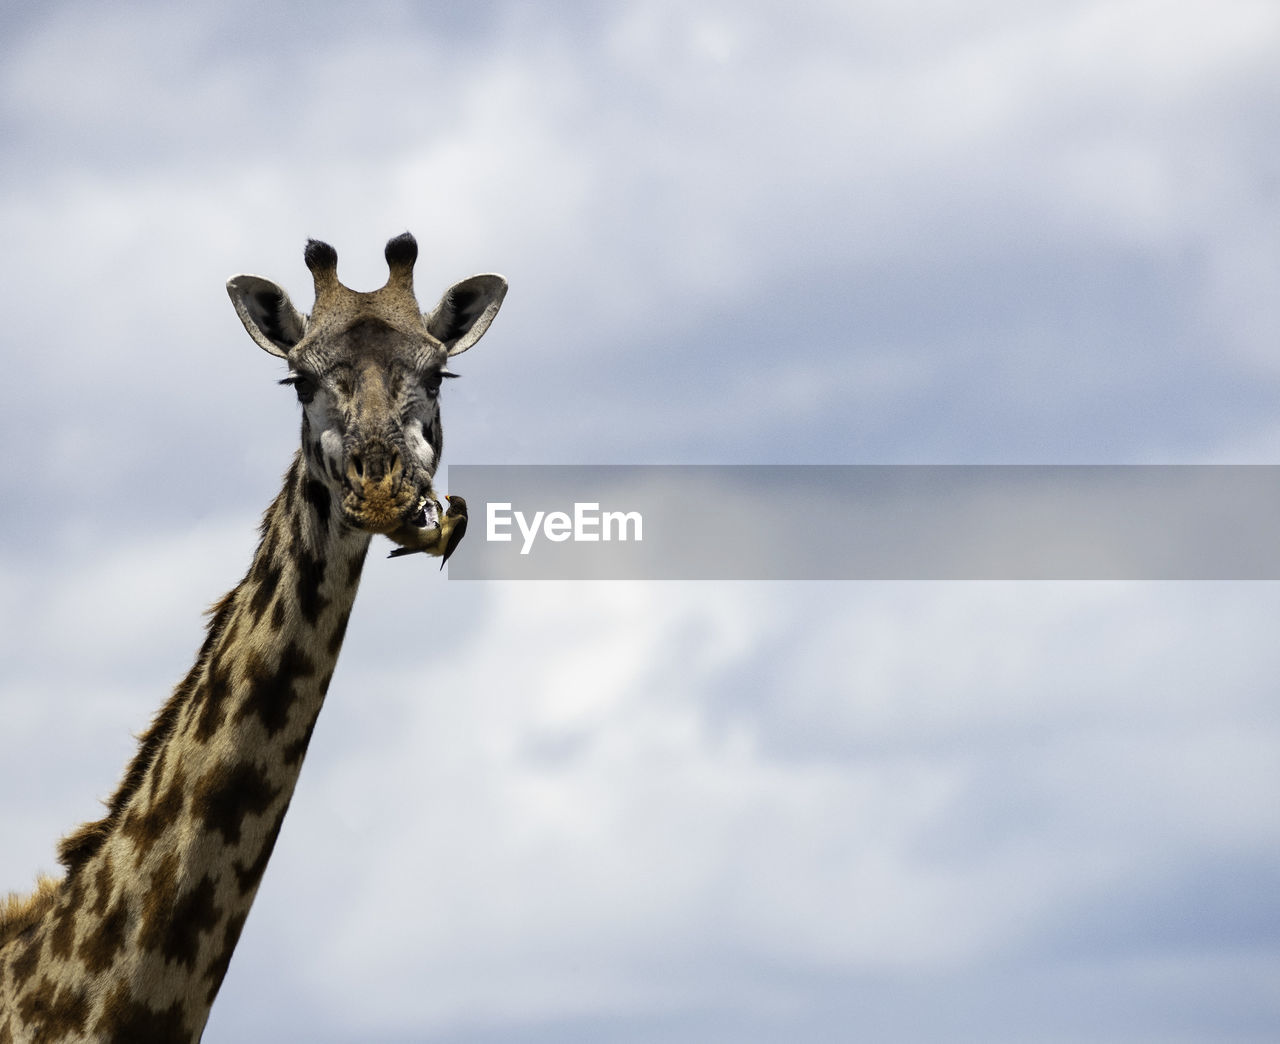 Low angle portrait of giraffe against cloudy sky